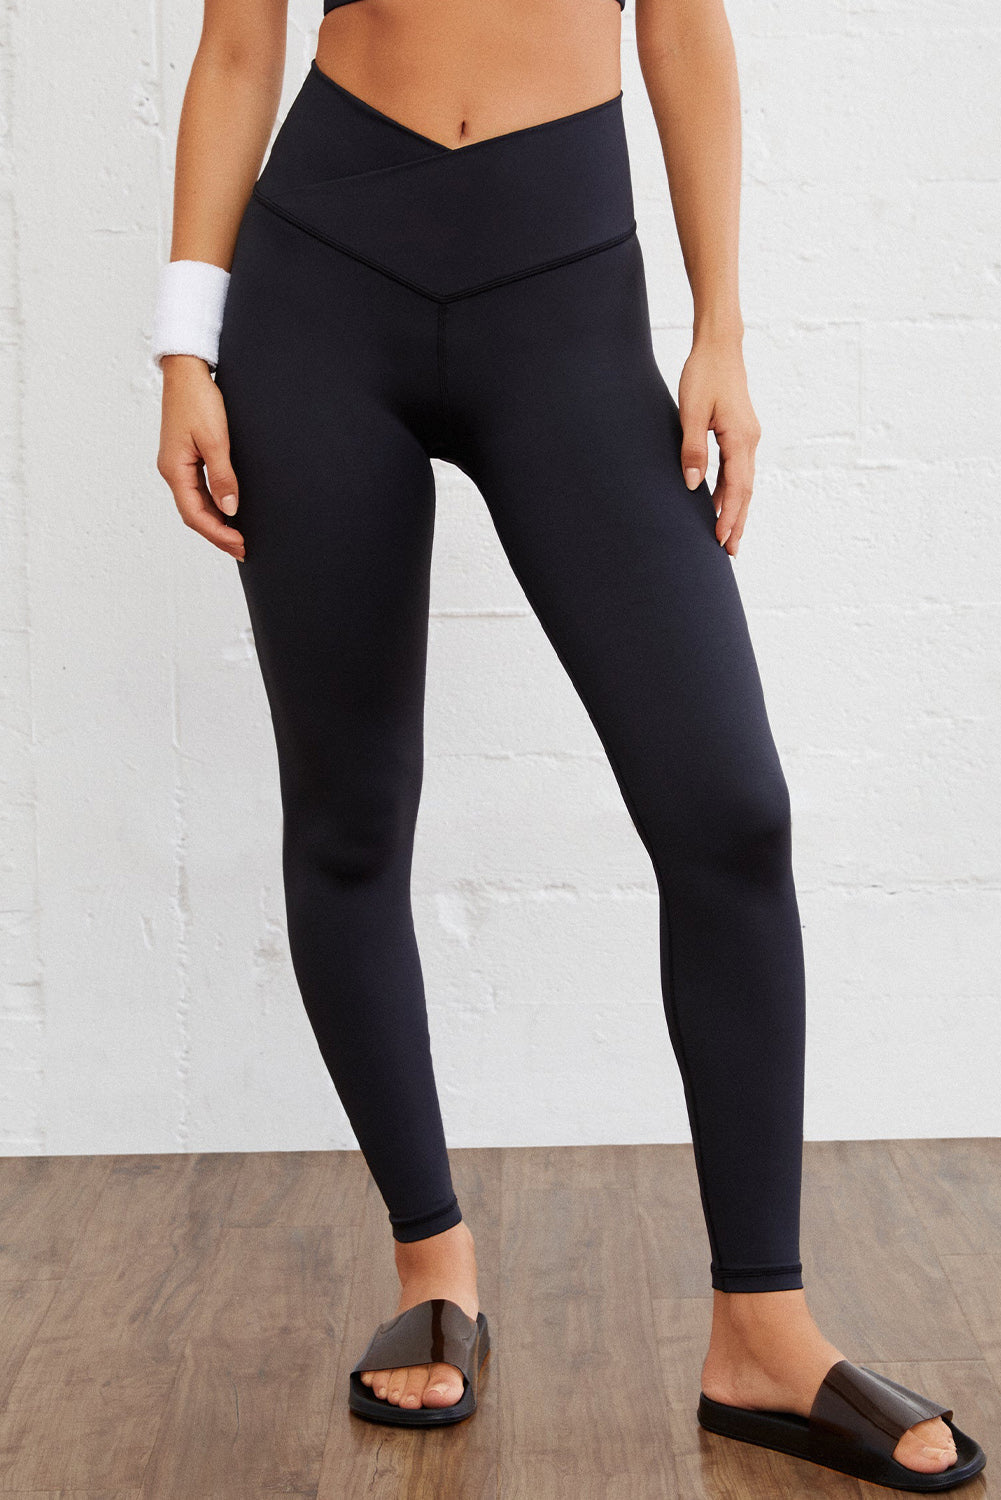 Black or Gray - Arched Waist Seamless Active Leggings - Sizes S-XL Ti Amo I love you